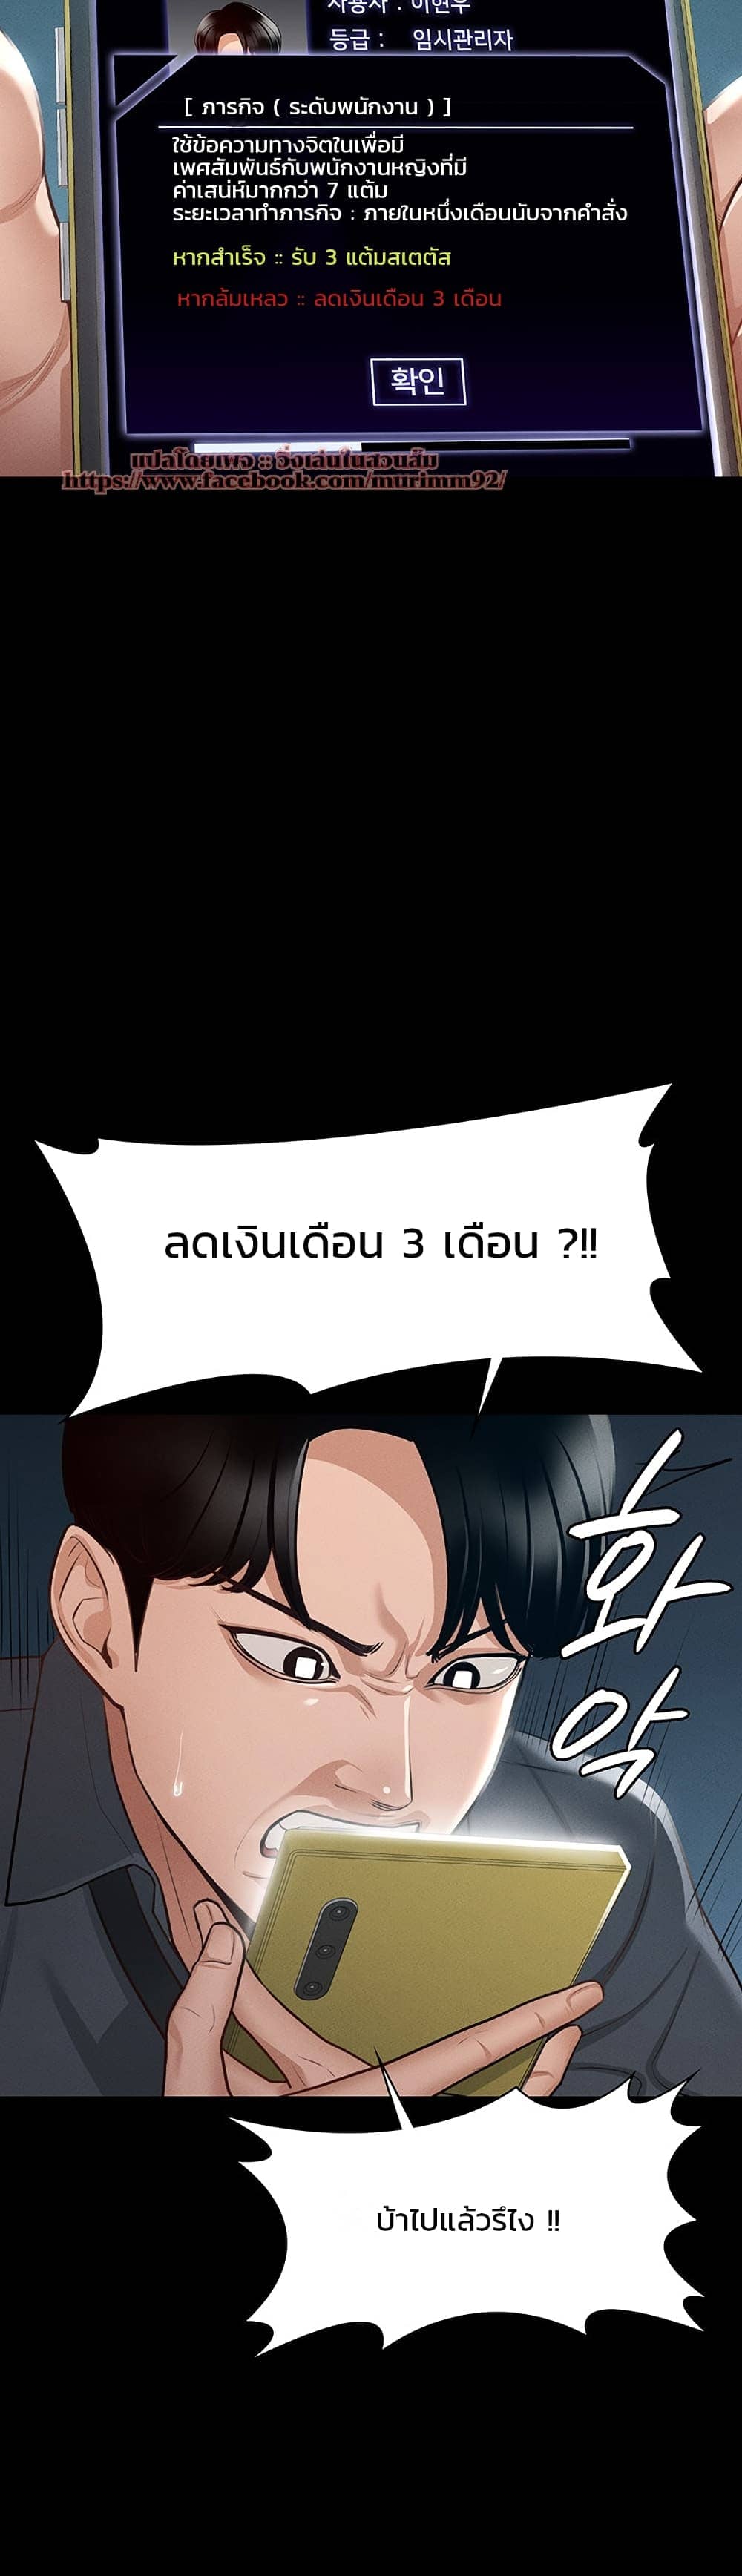 Workplace Manager Privileges ตอนที่ 8 ภาพ 1